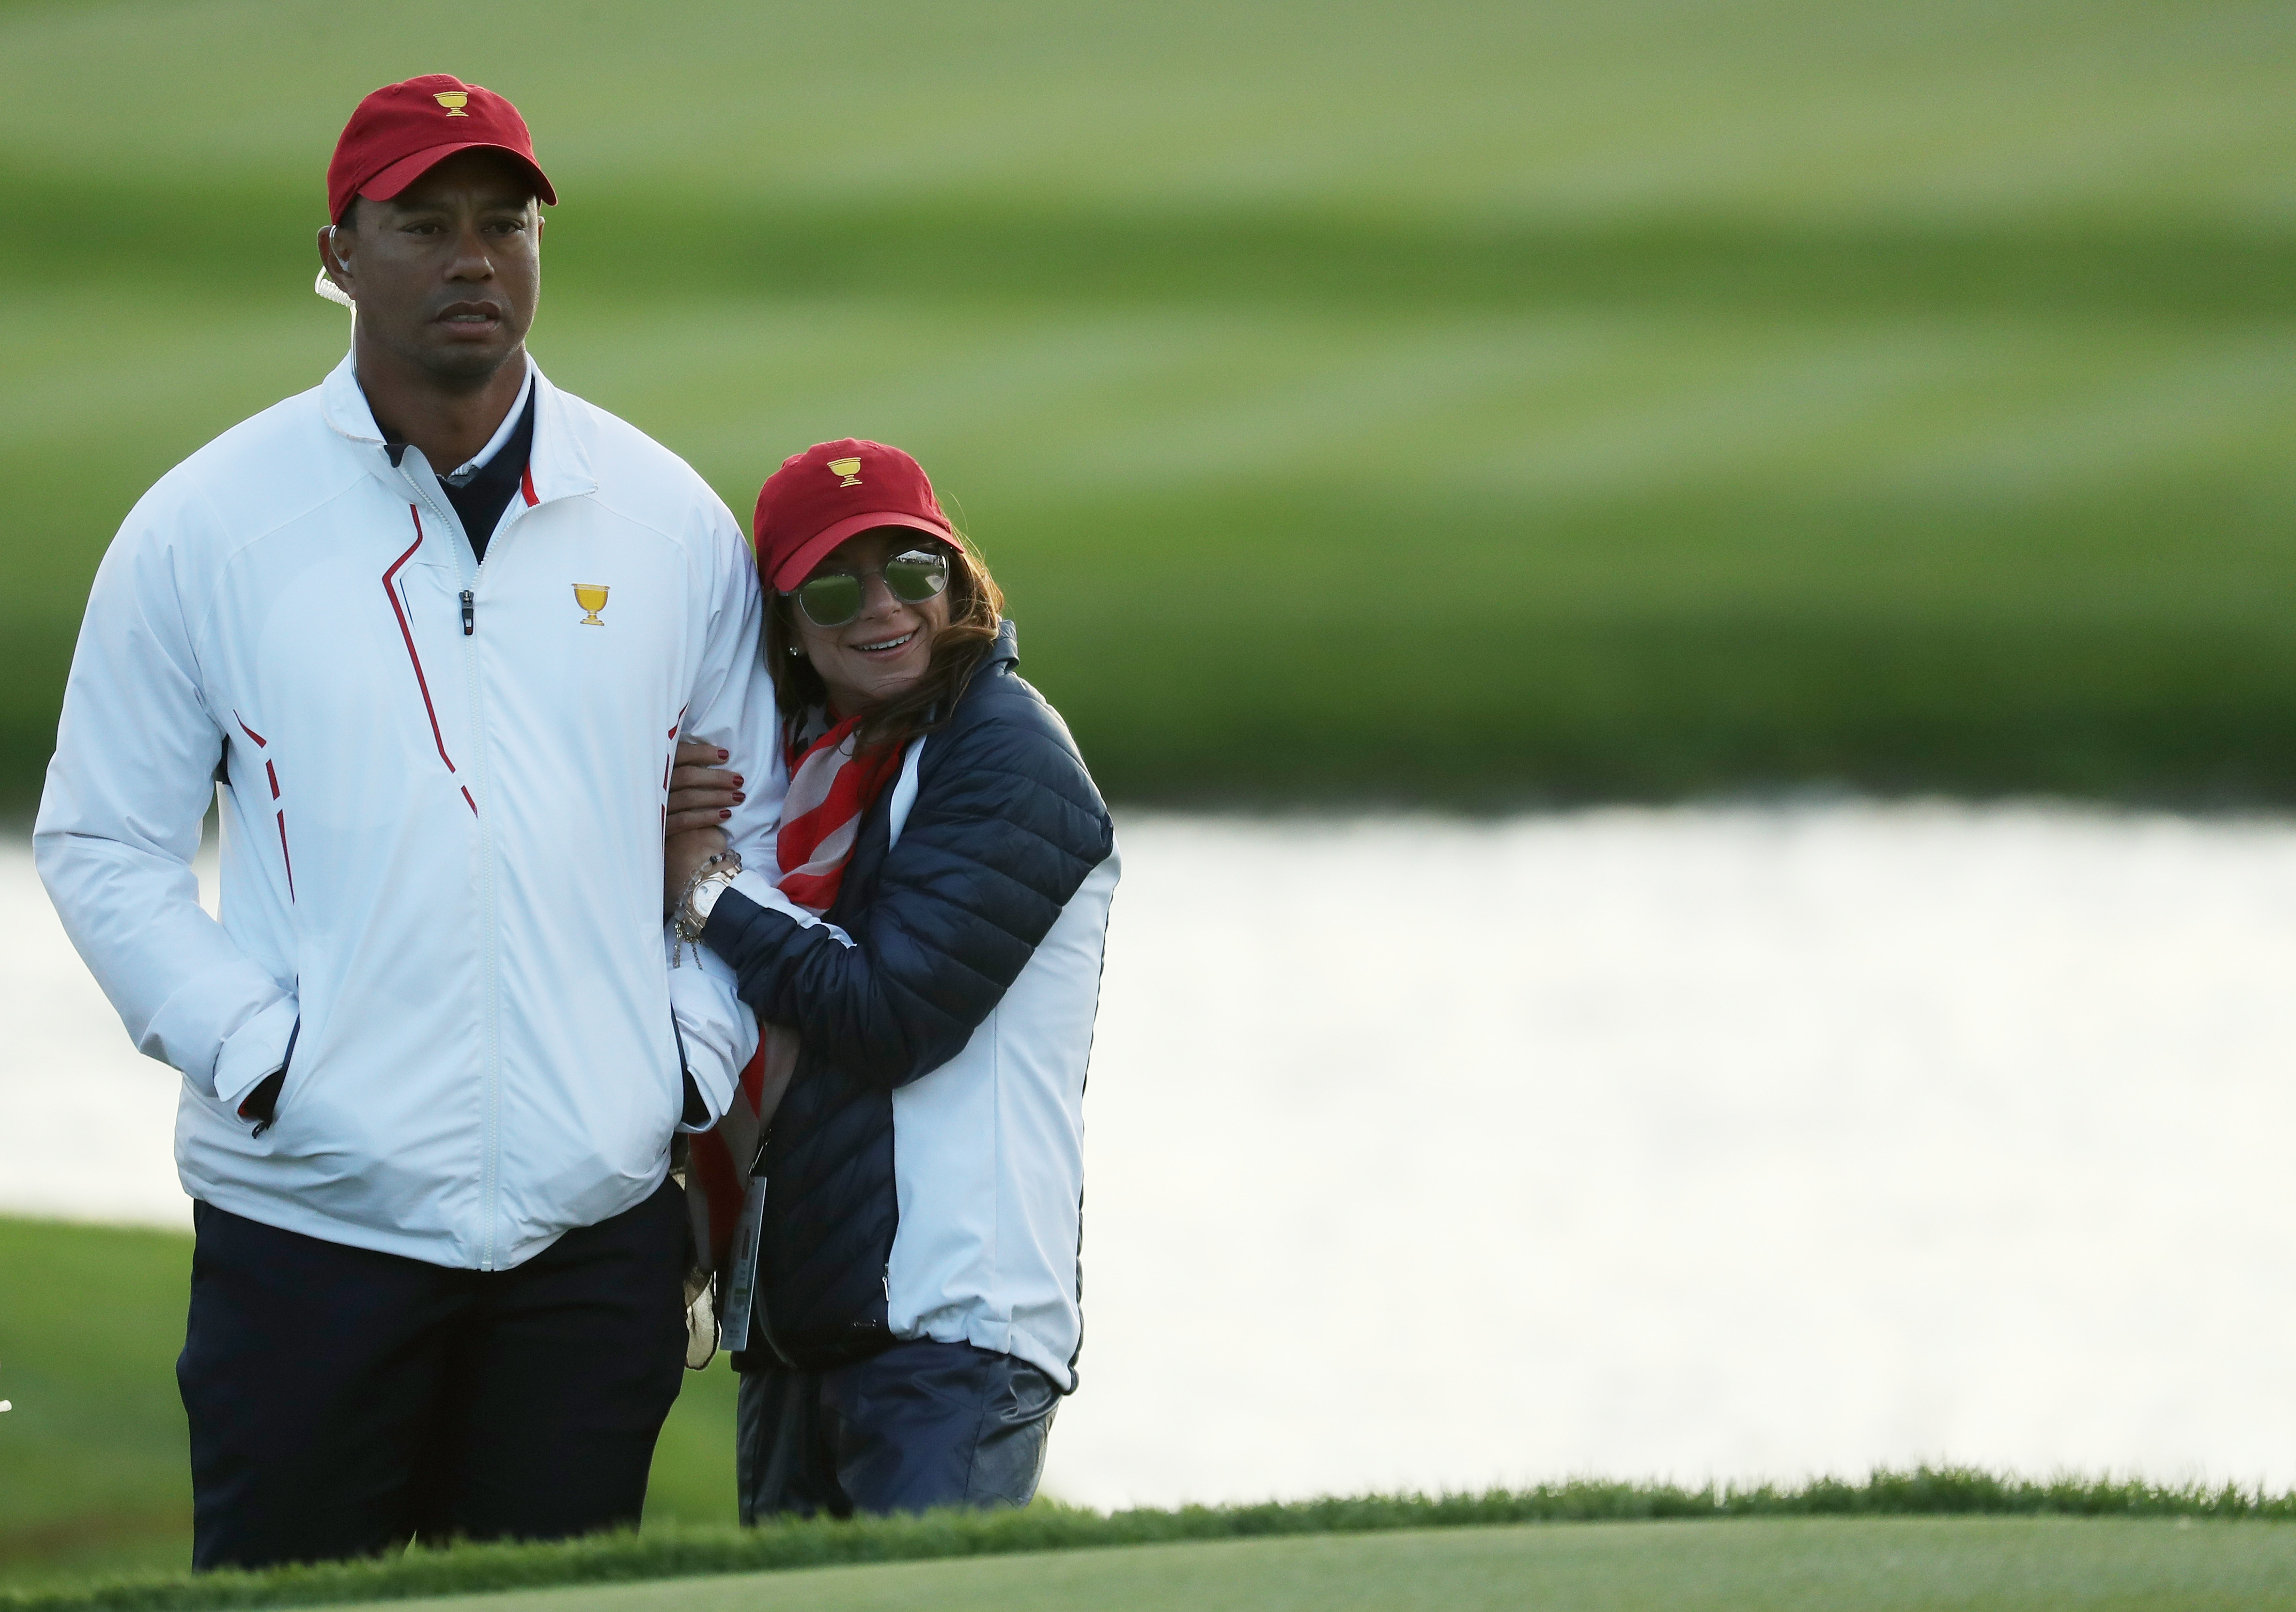 Erica Herman, Tiger Woods’ Girlfriend 5 Fast Facts